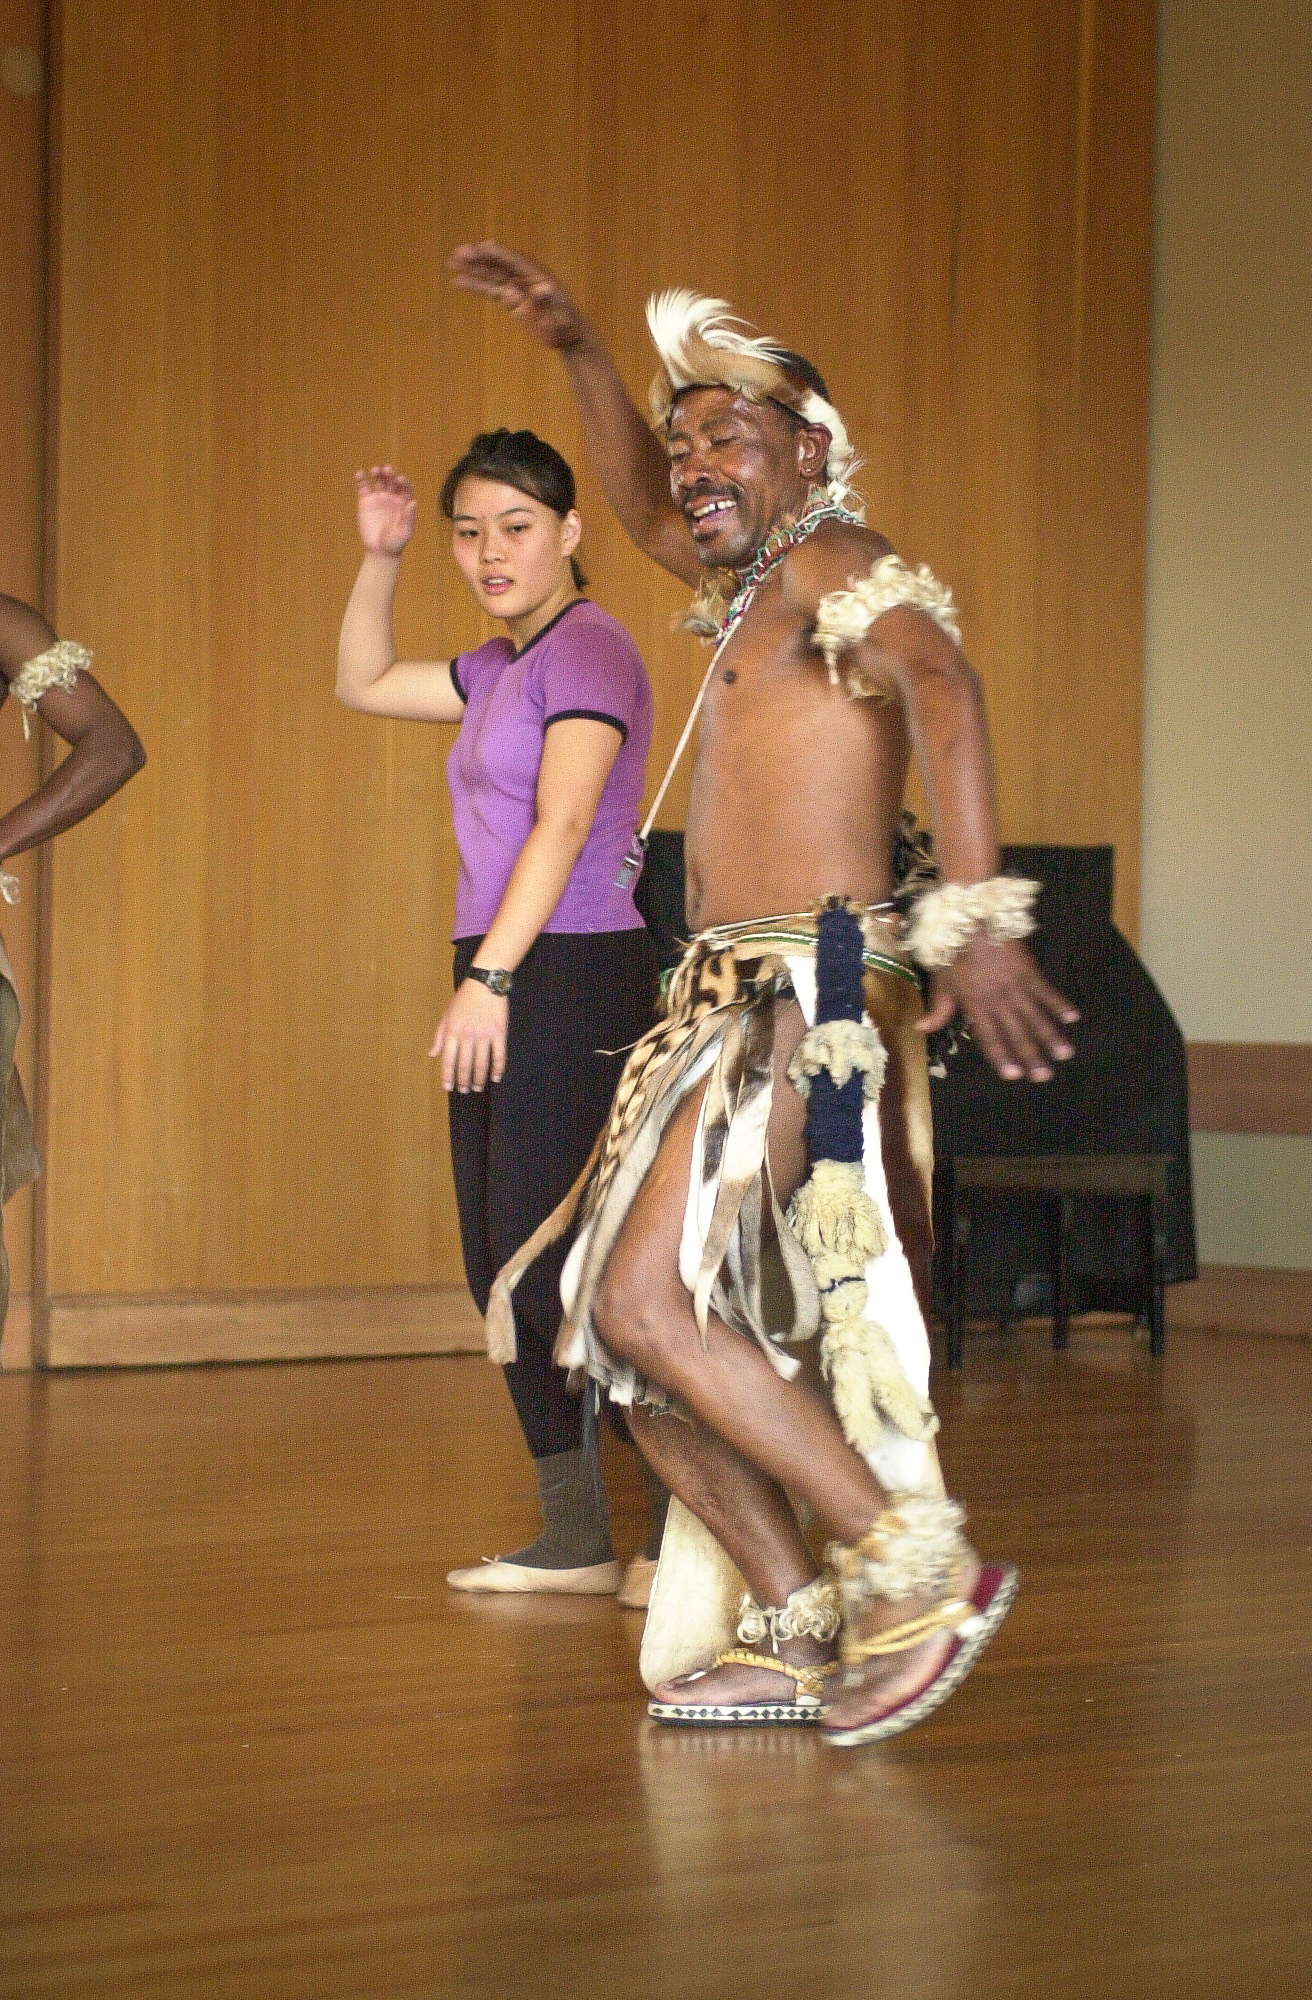 Dancers from Umzansi Zulu held workshops and demonstrations in November 2001 at Stanford.